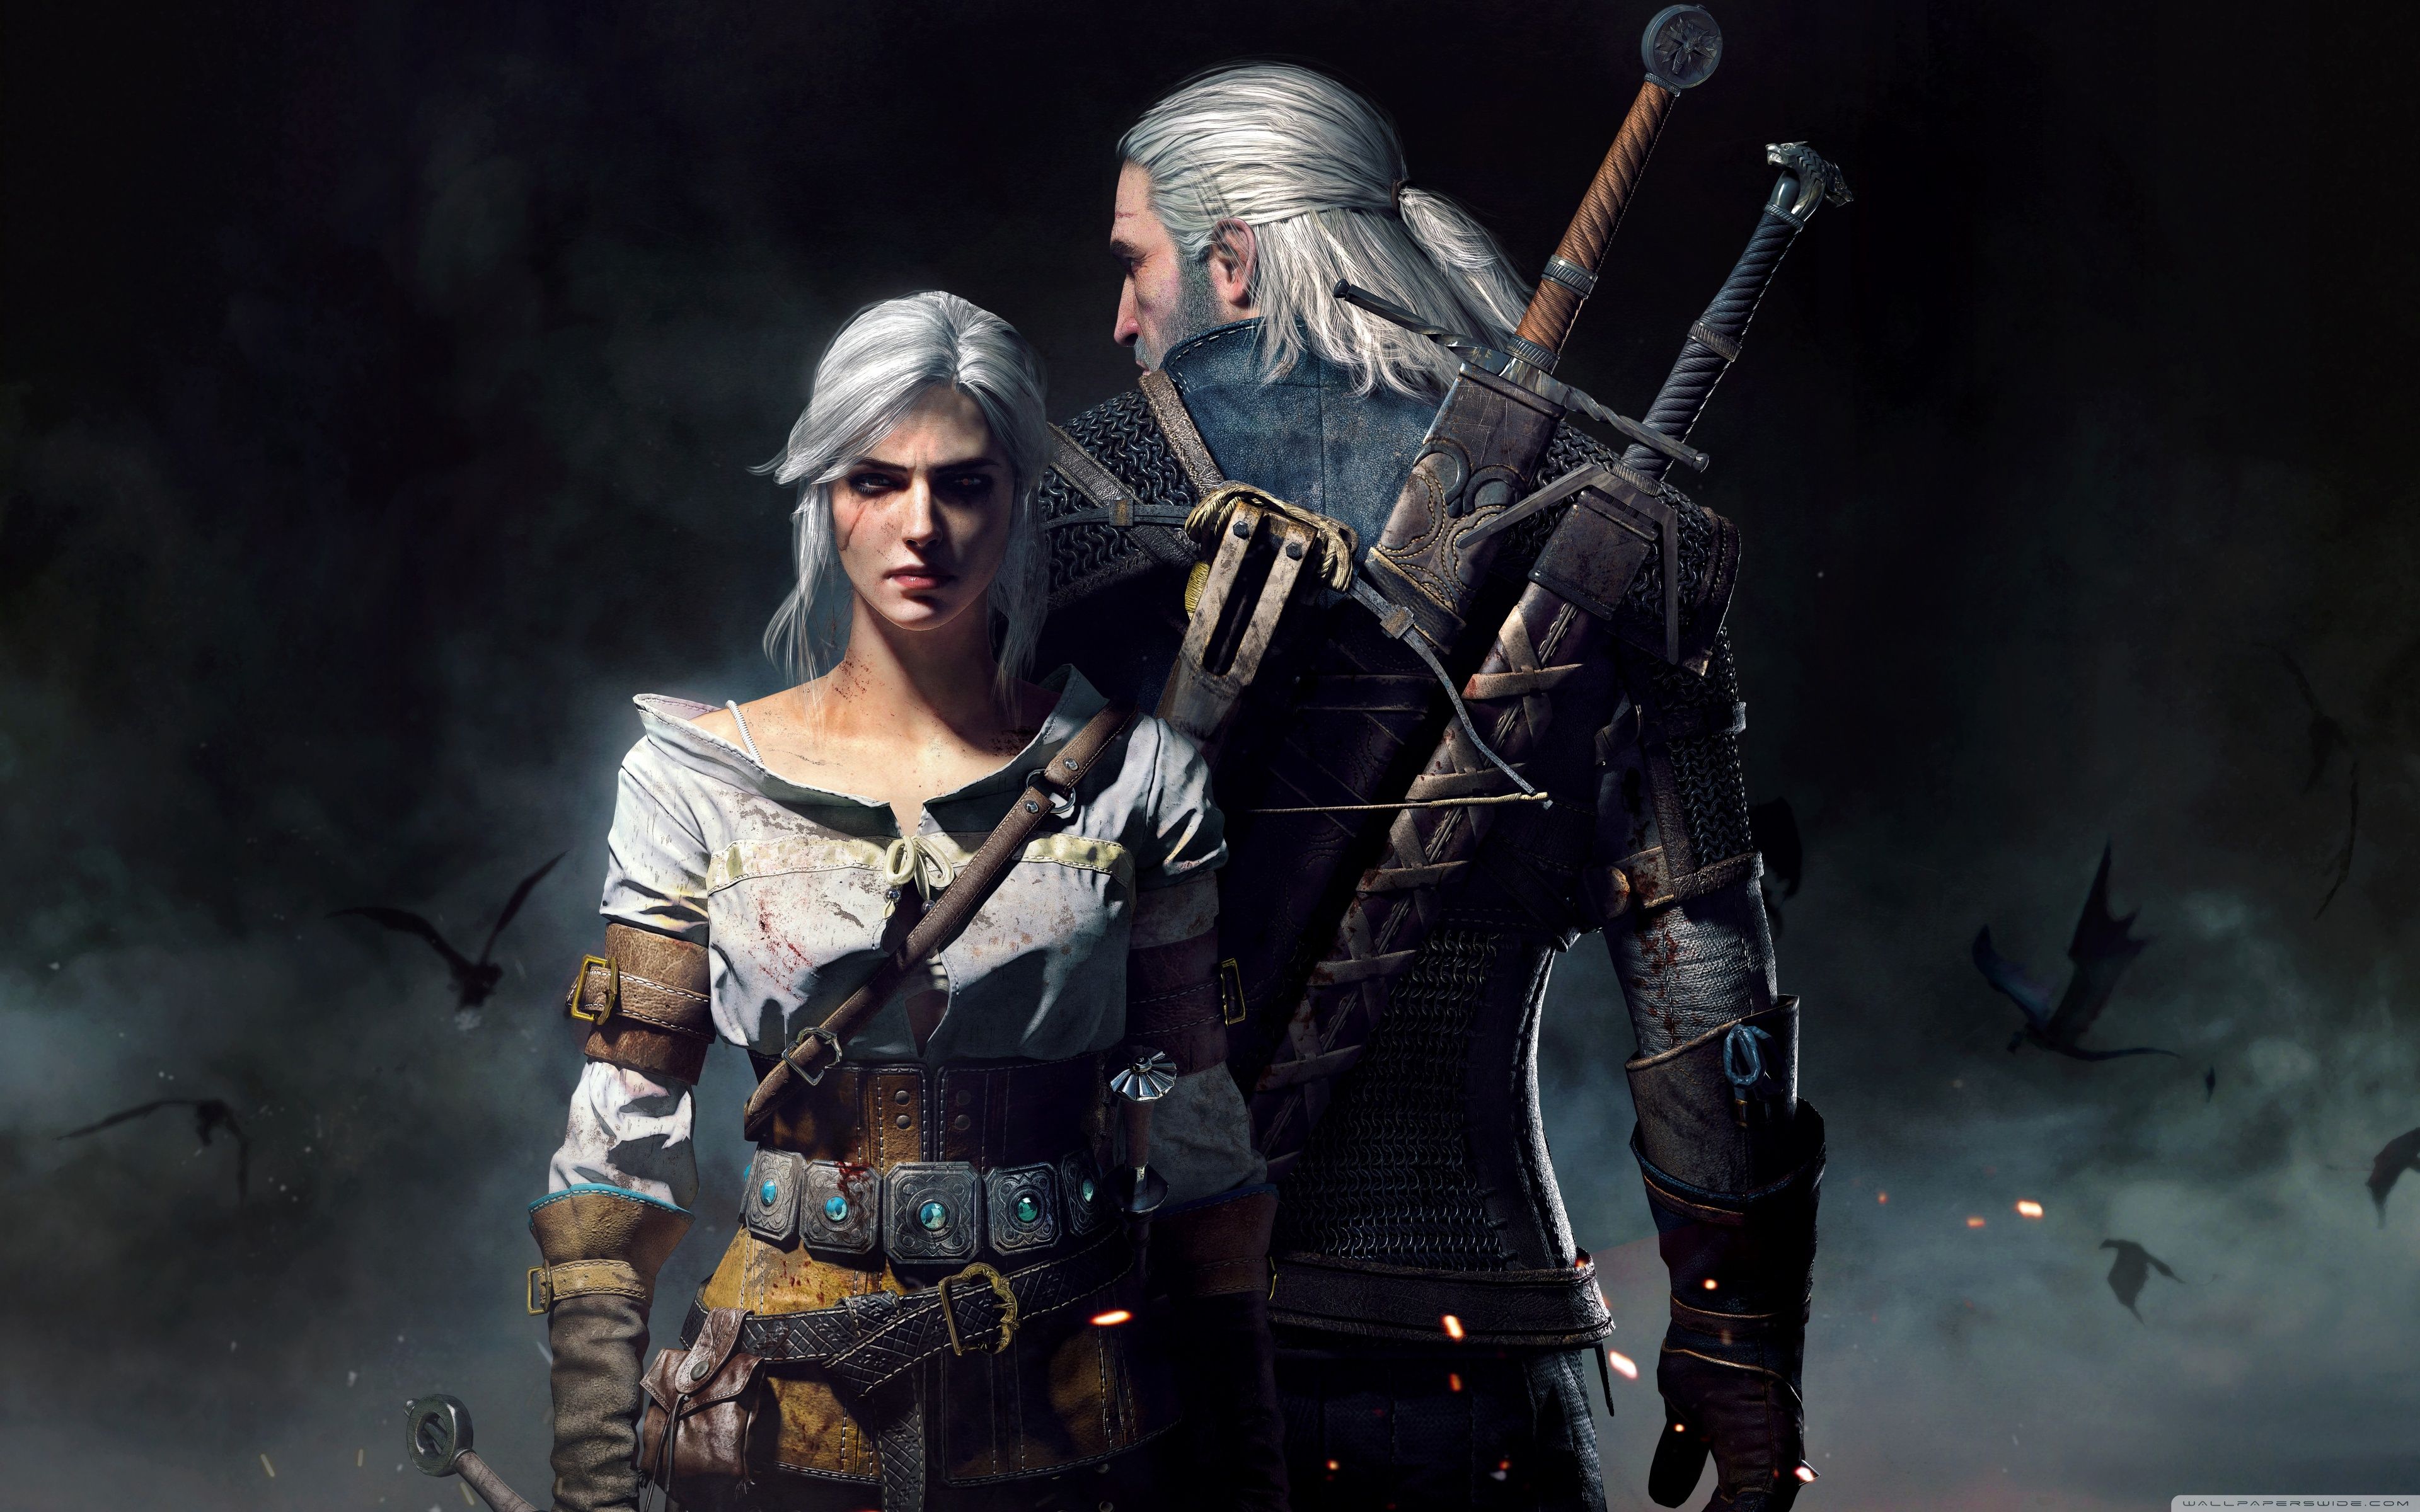 Witcher 3 Screensaver Wallpapers